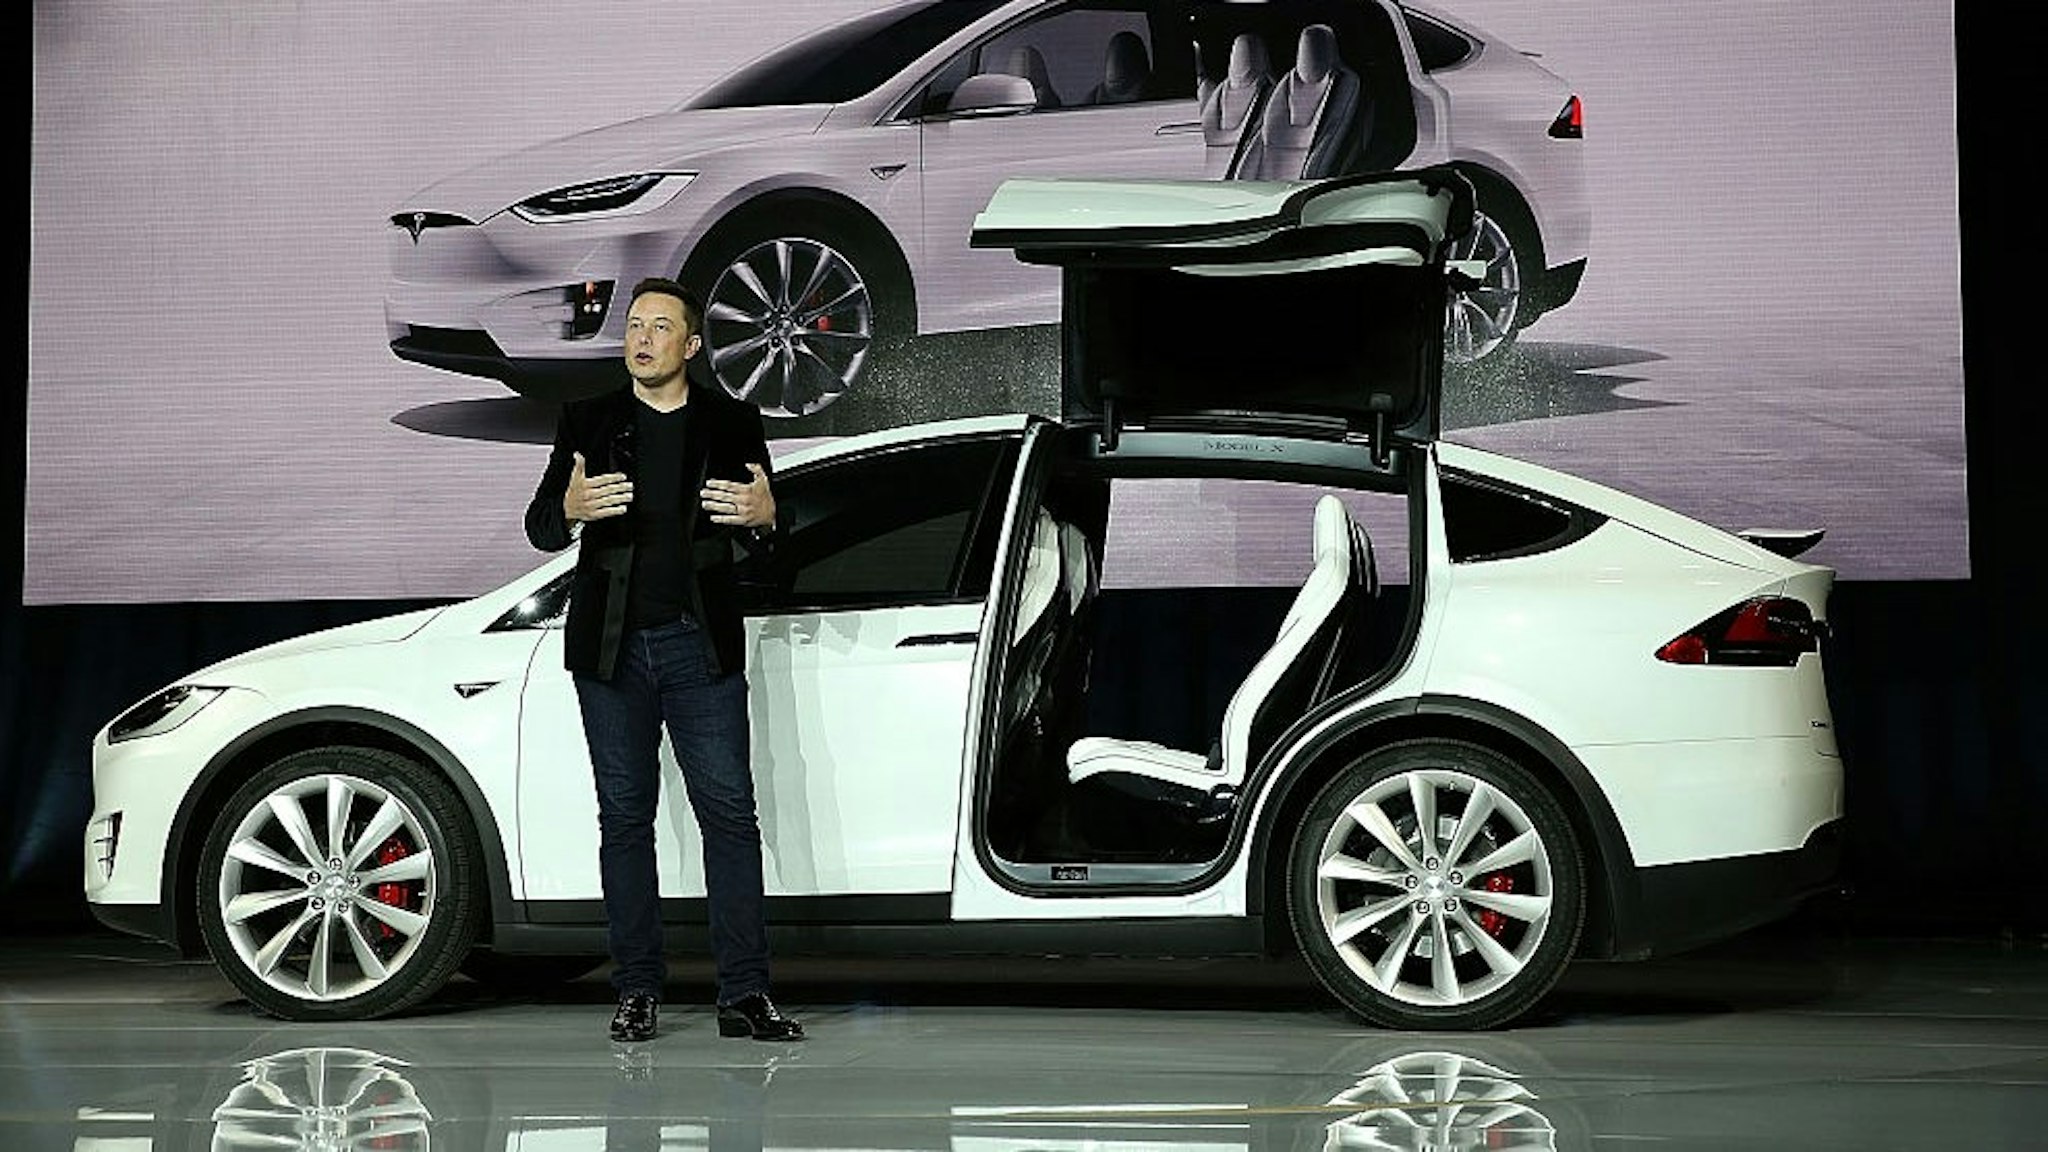 FREMONT, CA - SEPTEMBER 29: Tesla CEO Elon Musk speaks during an event to launch the new Tesla Model X Crossover SUV on September 29, 2015 in Fremont, California. After several production delays, Elon Musk officially launched the much anticipated Tesla Model X Crossover SUV. The (Photo by